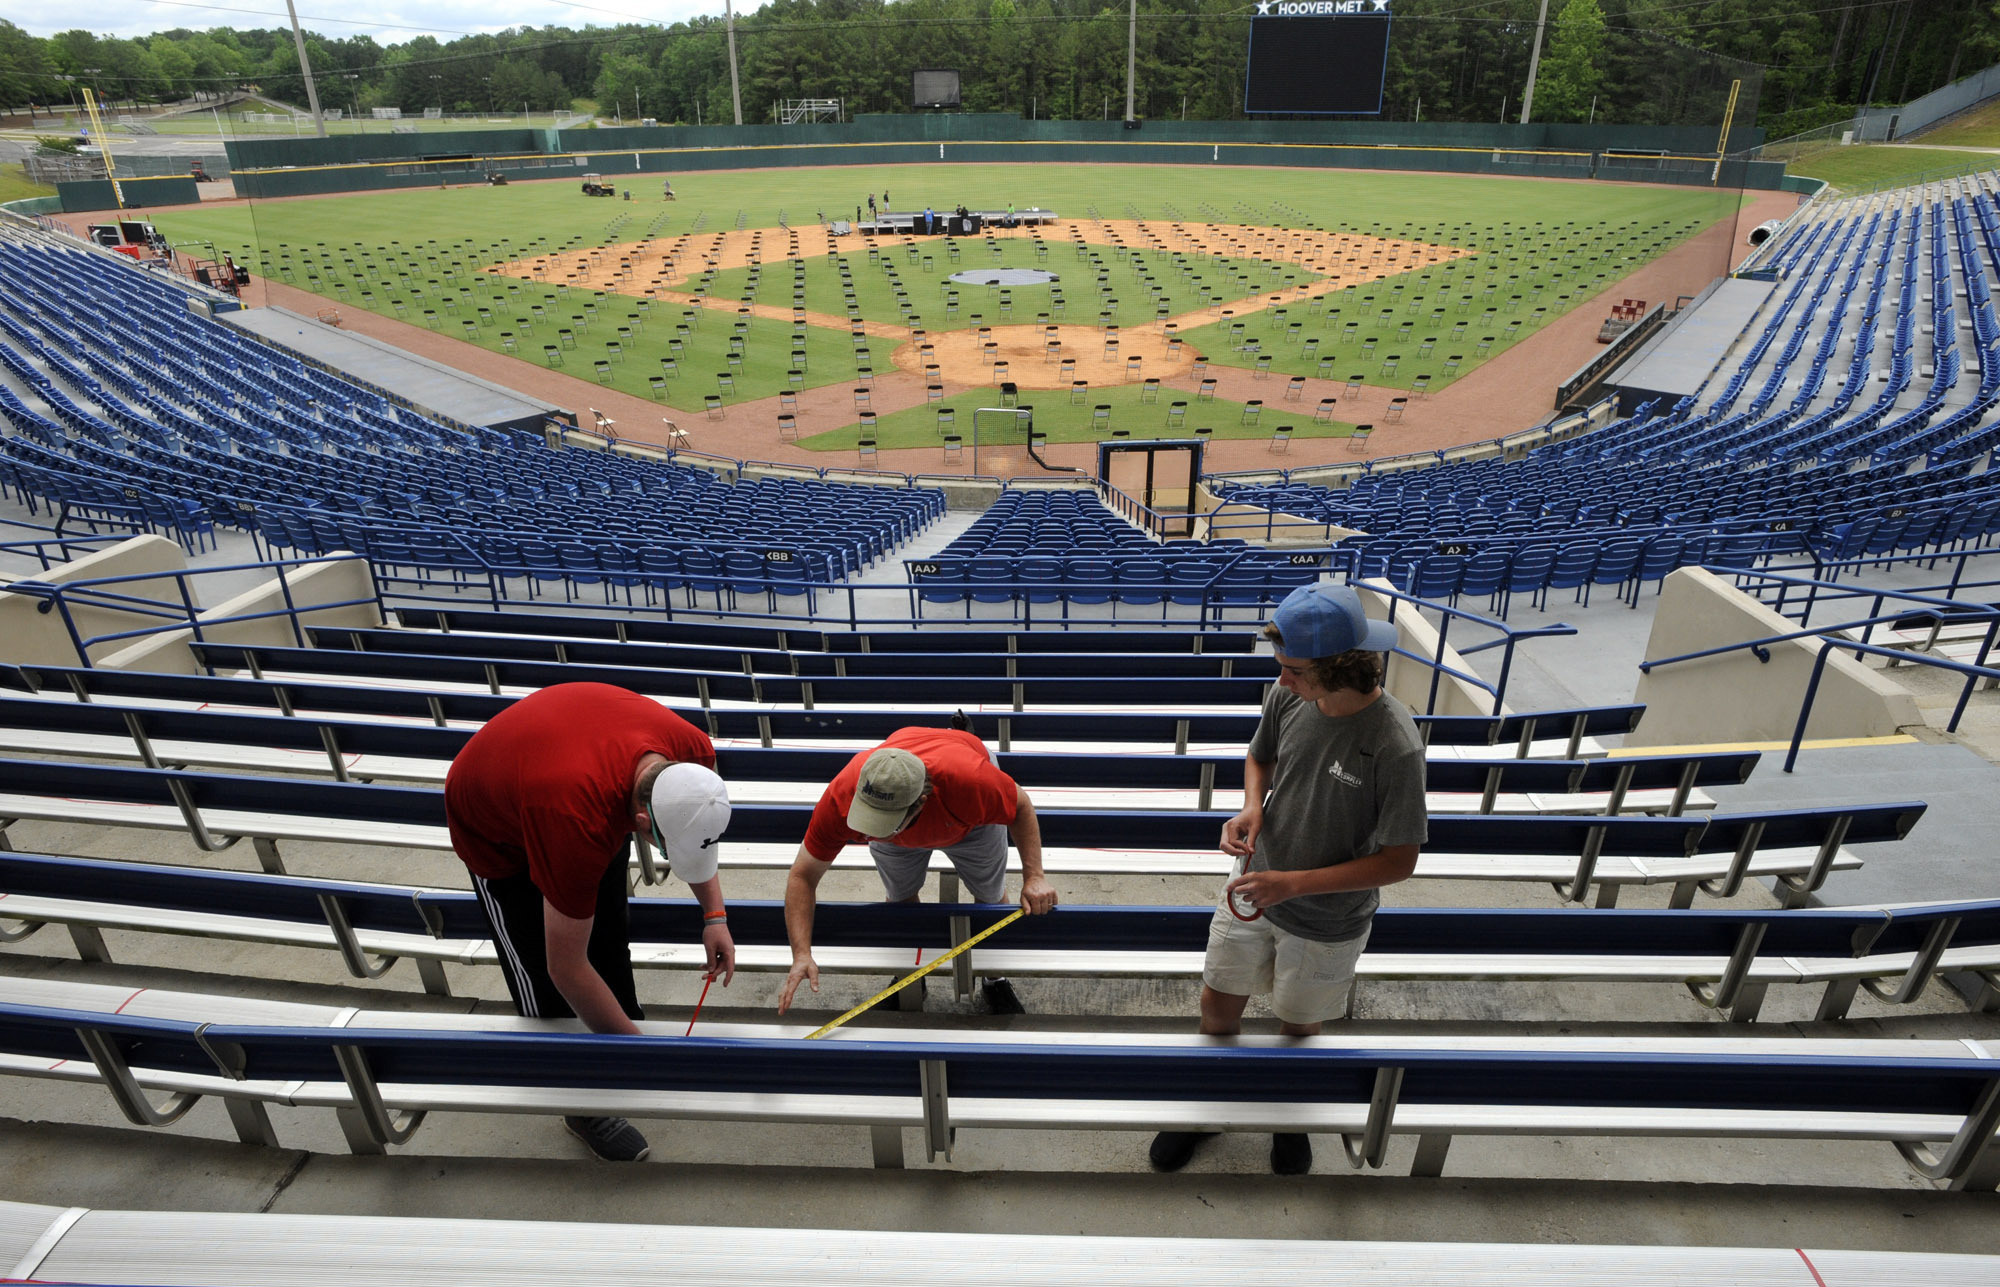 PHOTO: Workers use tape to block off seats as they prepare for a large high school graduation ceremony at Hoover Metropolitan Stadium in Hoover, Ala., Tuesday, May 19, 2020.